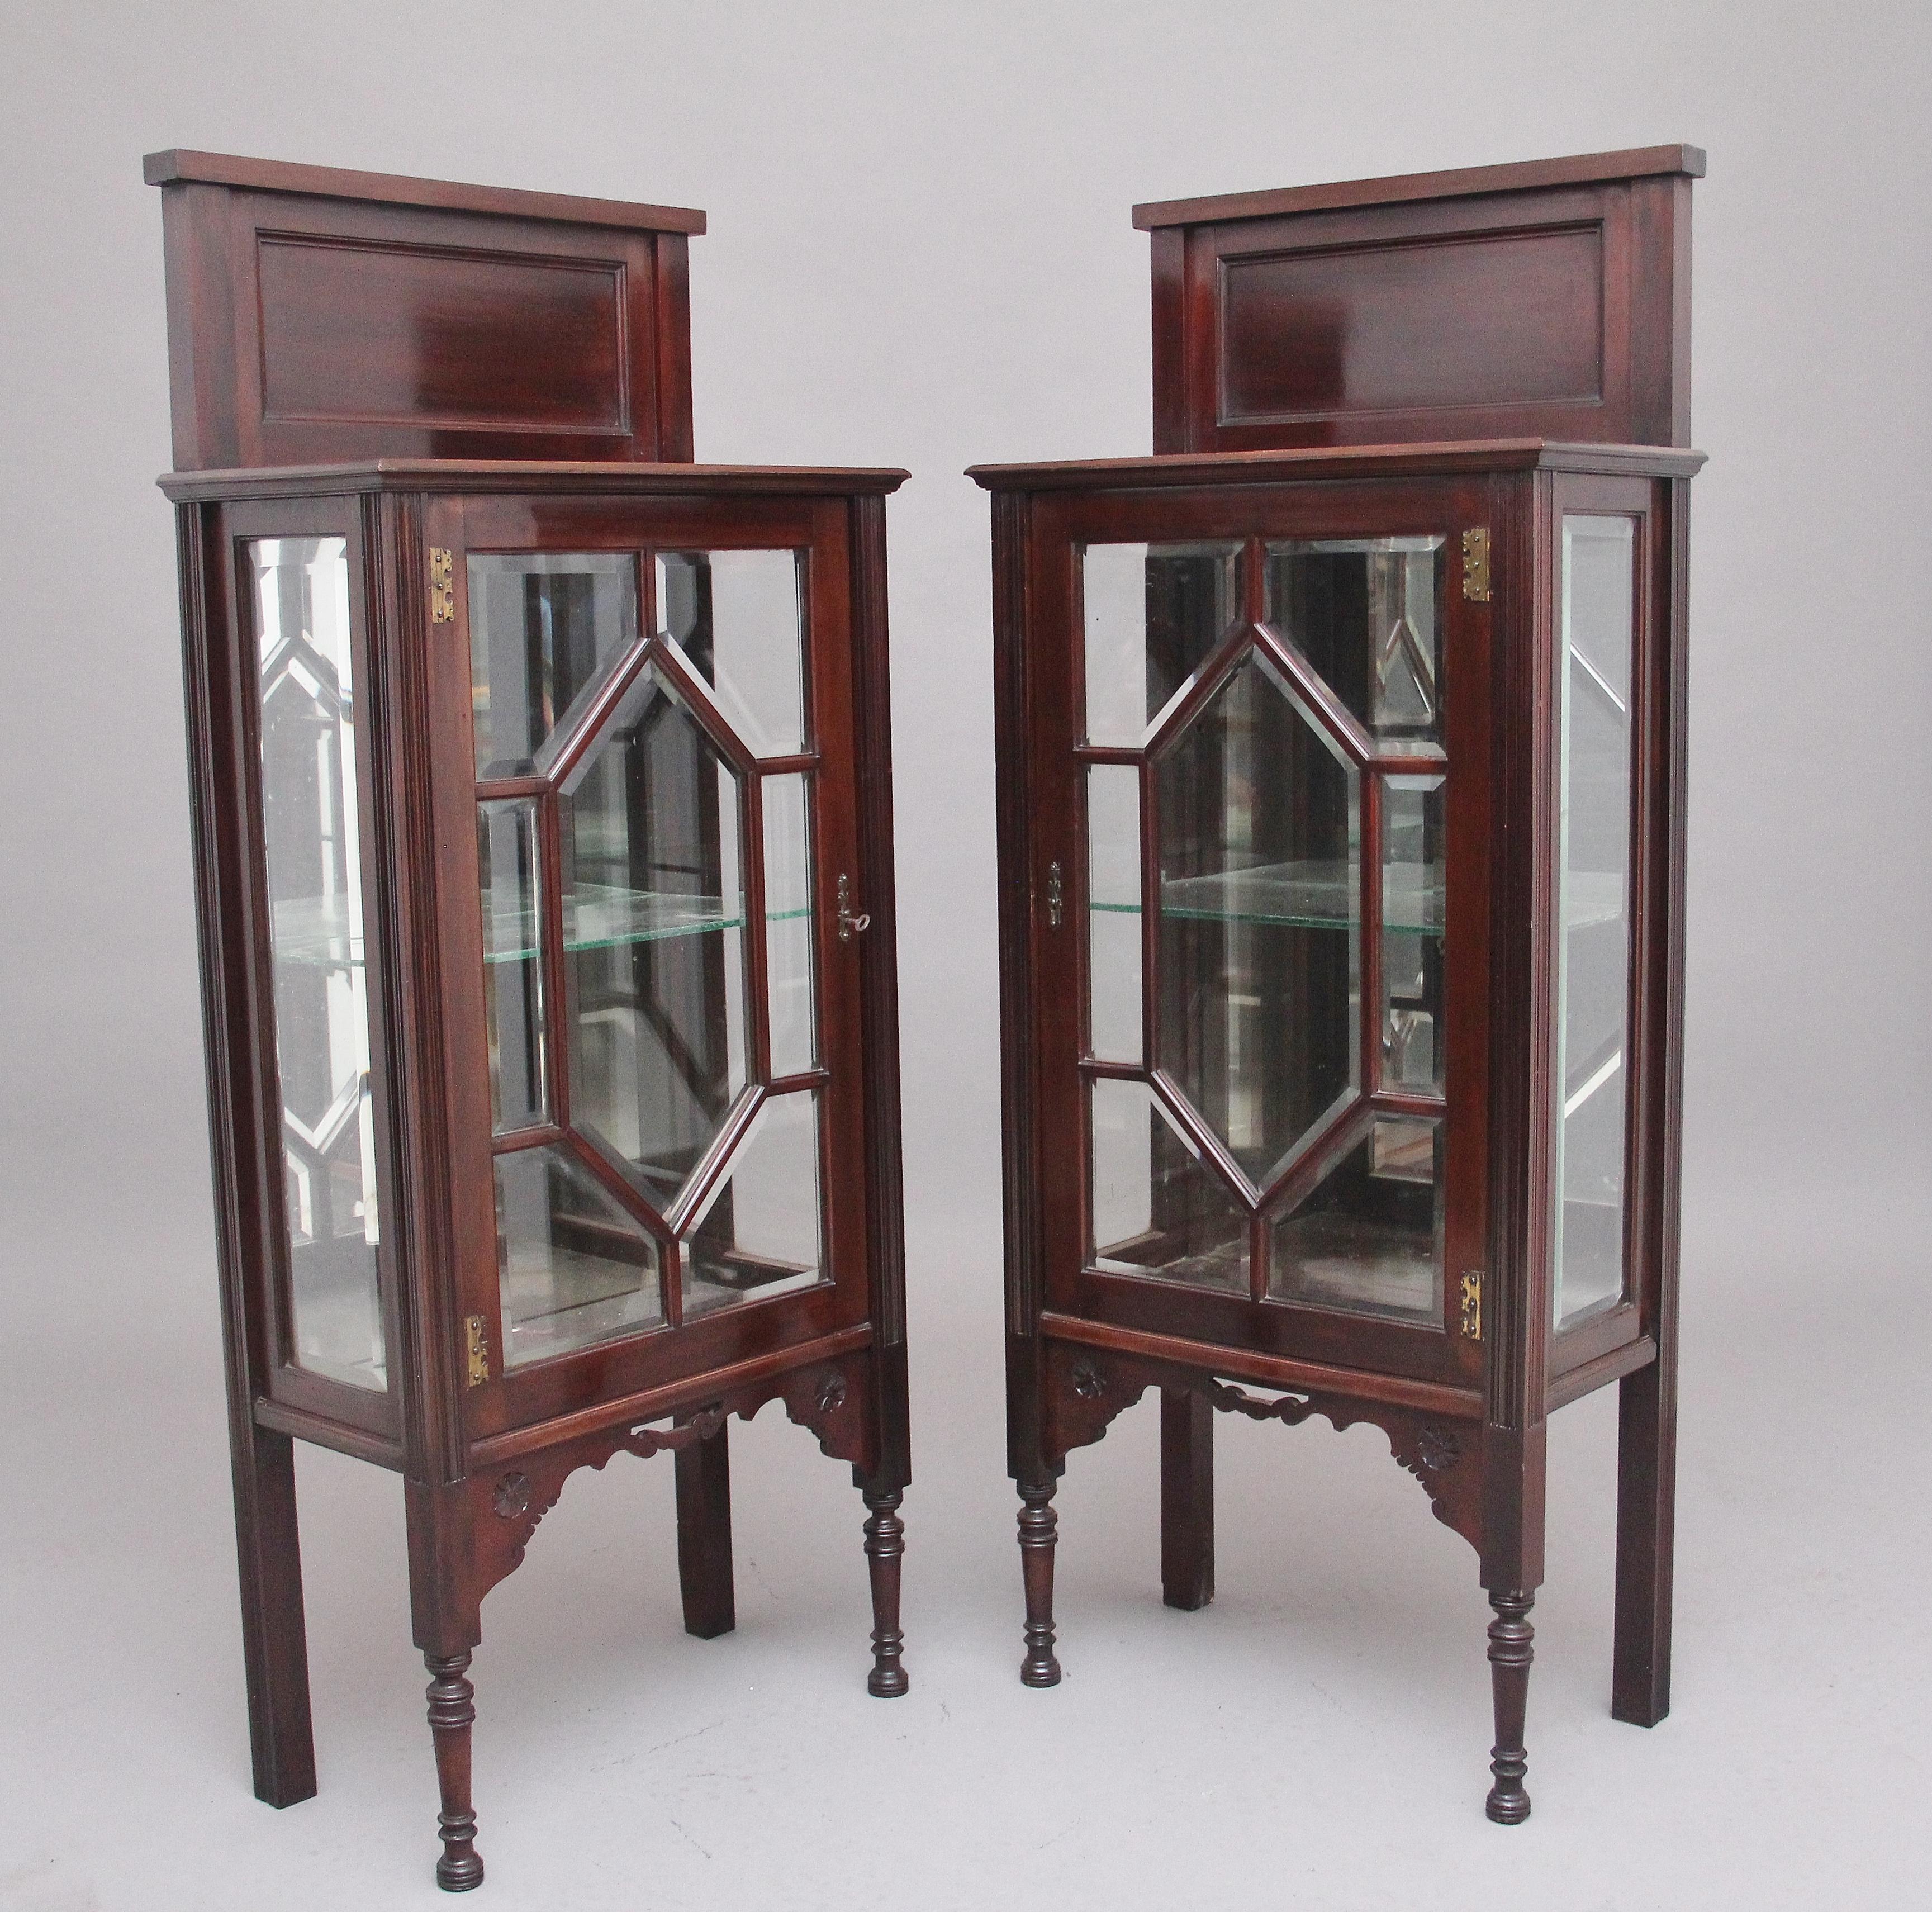 A pair of early 20th century mahogany display cabinets, the moulded edge top with a panelled back, astragal glazed door opening to reveal a mirrored back and a single glass shelf, having a decorative shaped and carved apron, supported on rear square